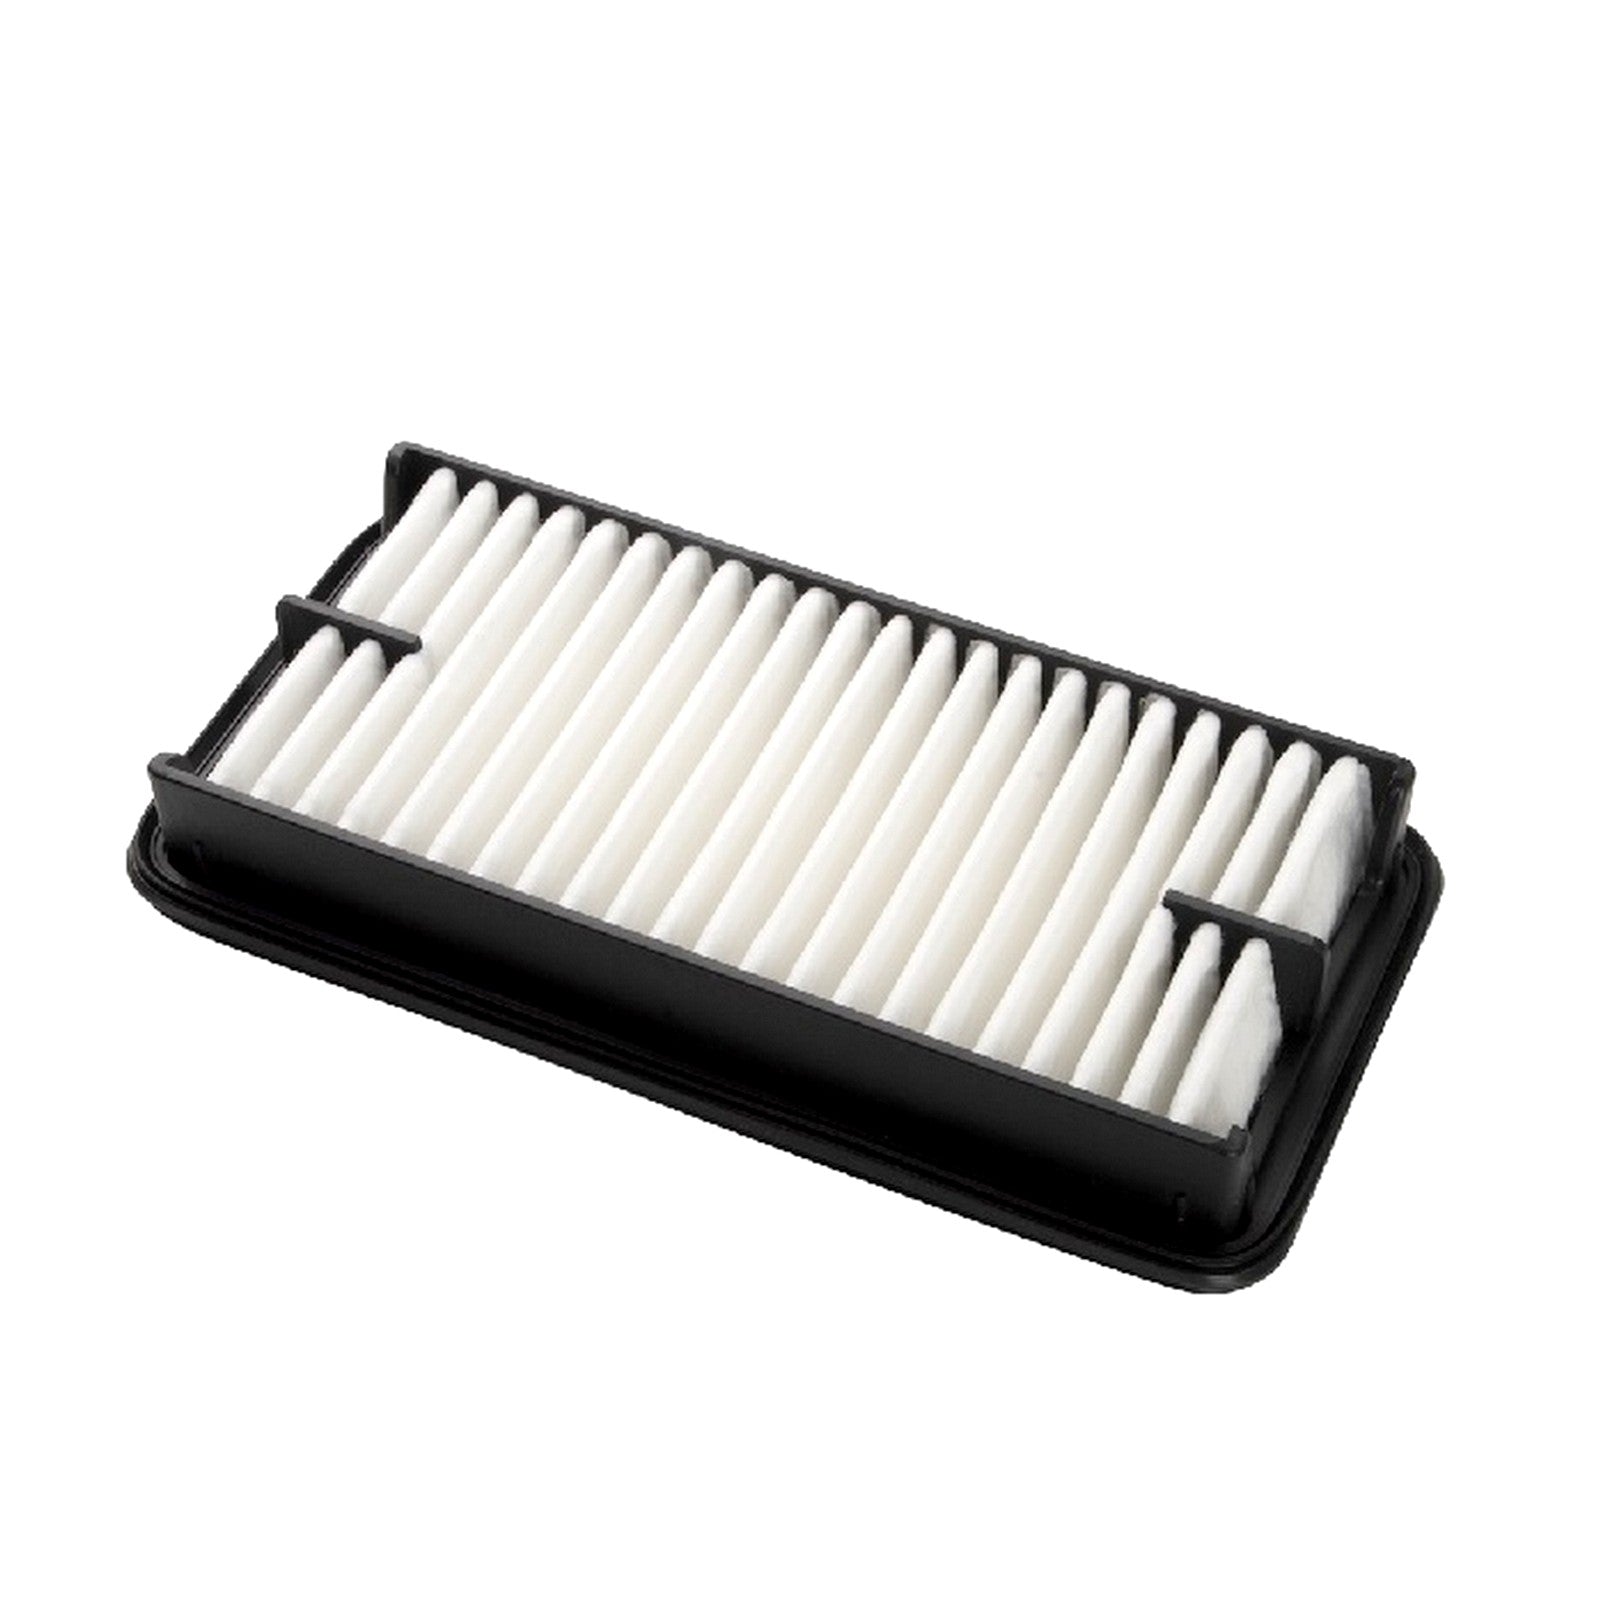 AIR FILTER ELEMENT SUB ASSY FOR NISSAN DAYZ & eK WAGON (IMPORTED)